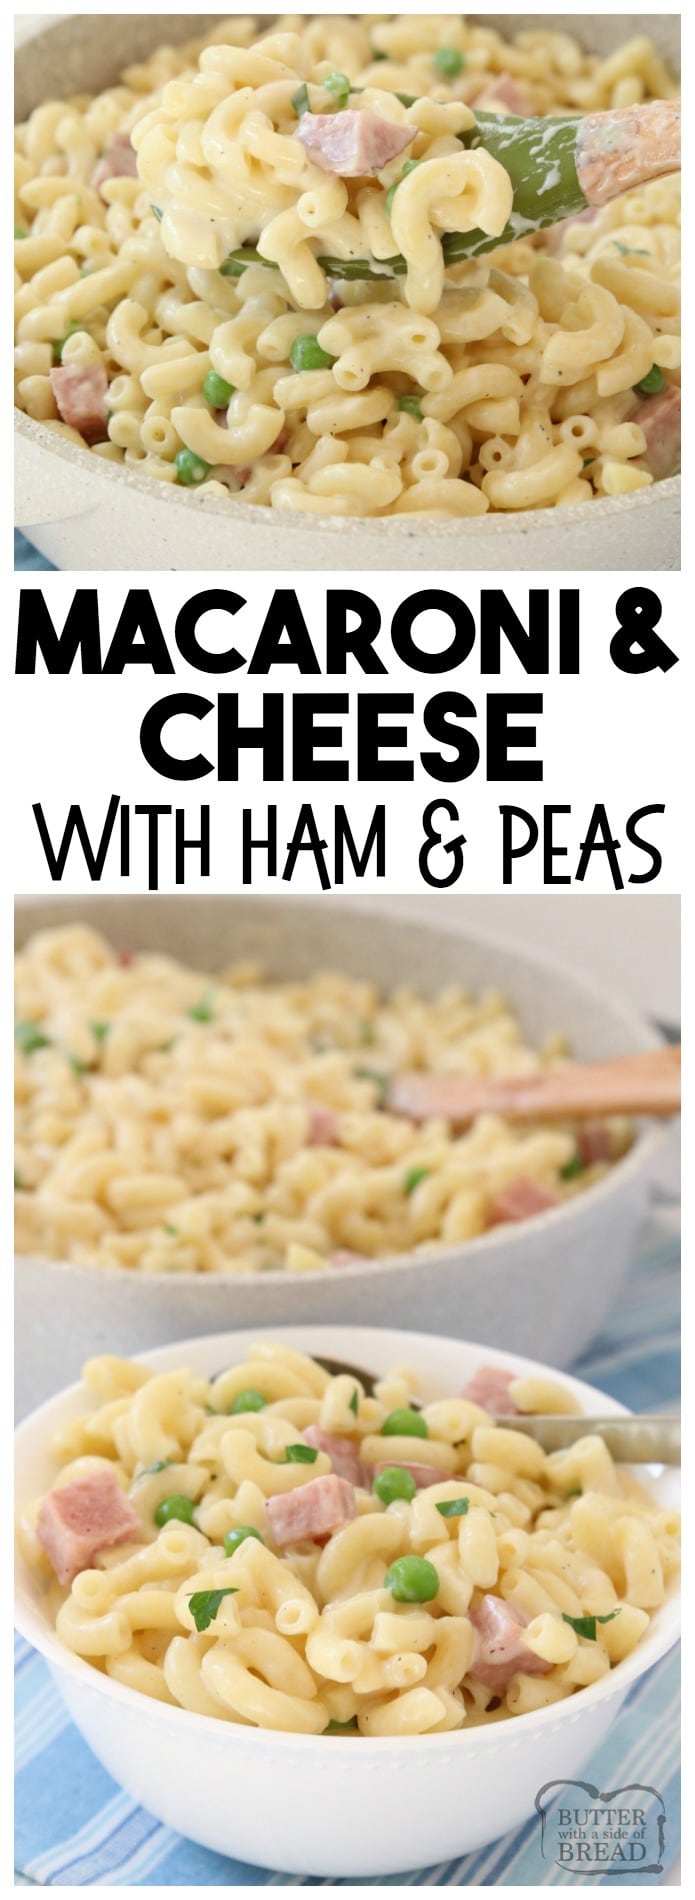 Macaroni and Cheese with Ham and Peas is a great weeknight family dinner! Creamy Homemade Macaroni and Cheese with two types of cheese made on the stove or in the Instant Pot. We added ham and peas to round out the meal! Homemade Macaroni & Cheese recipe from Butter With A Side of Bread